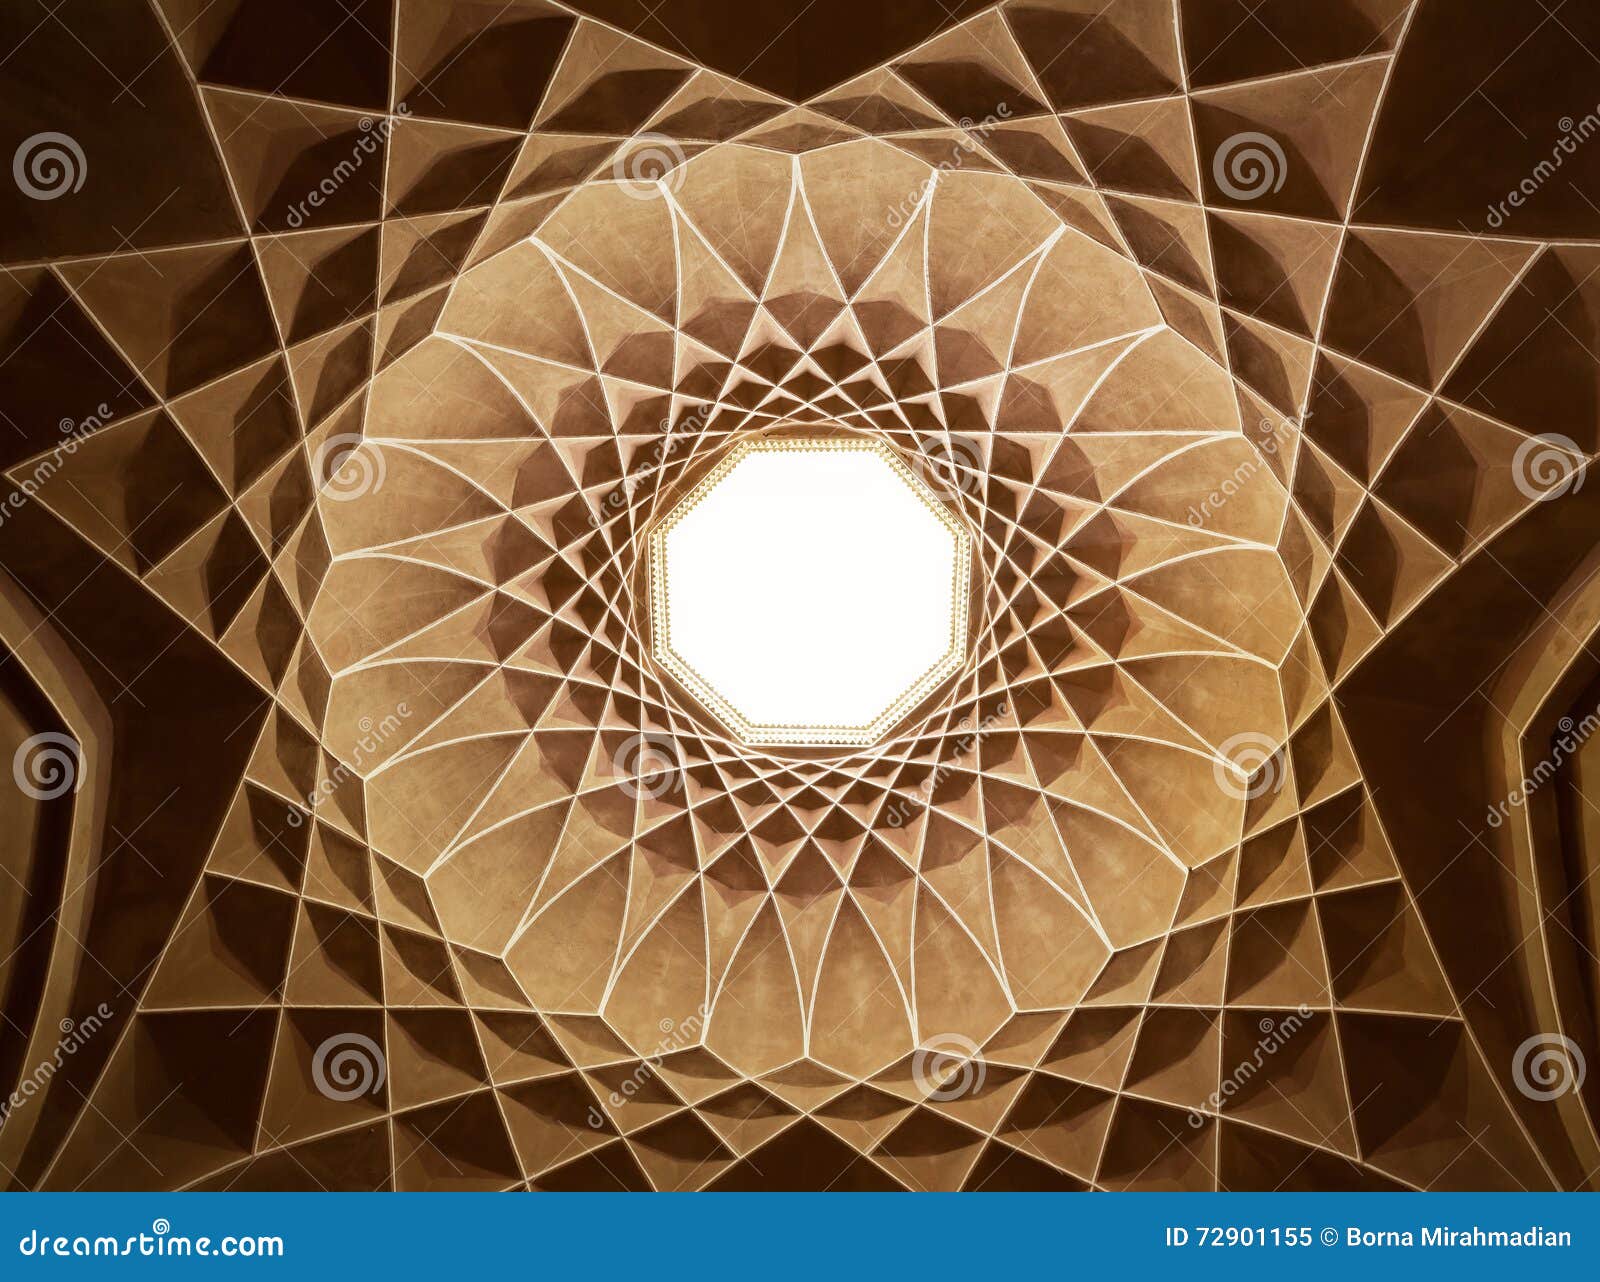 inside the ceiling dome of pavilion in dowlat abad garden of yazd